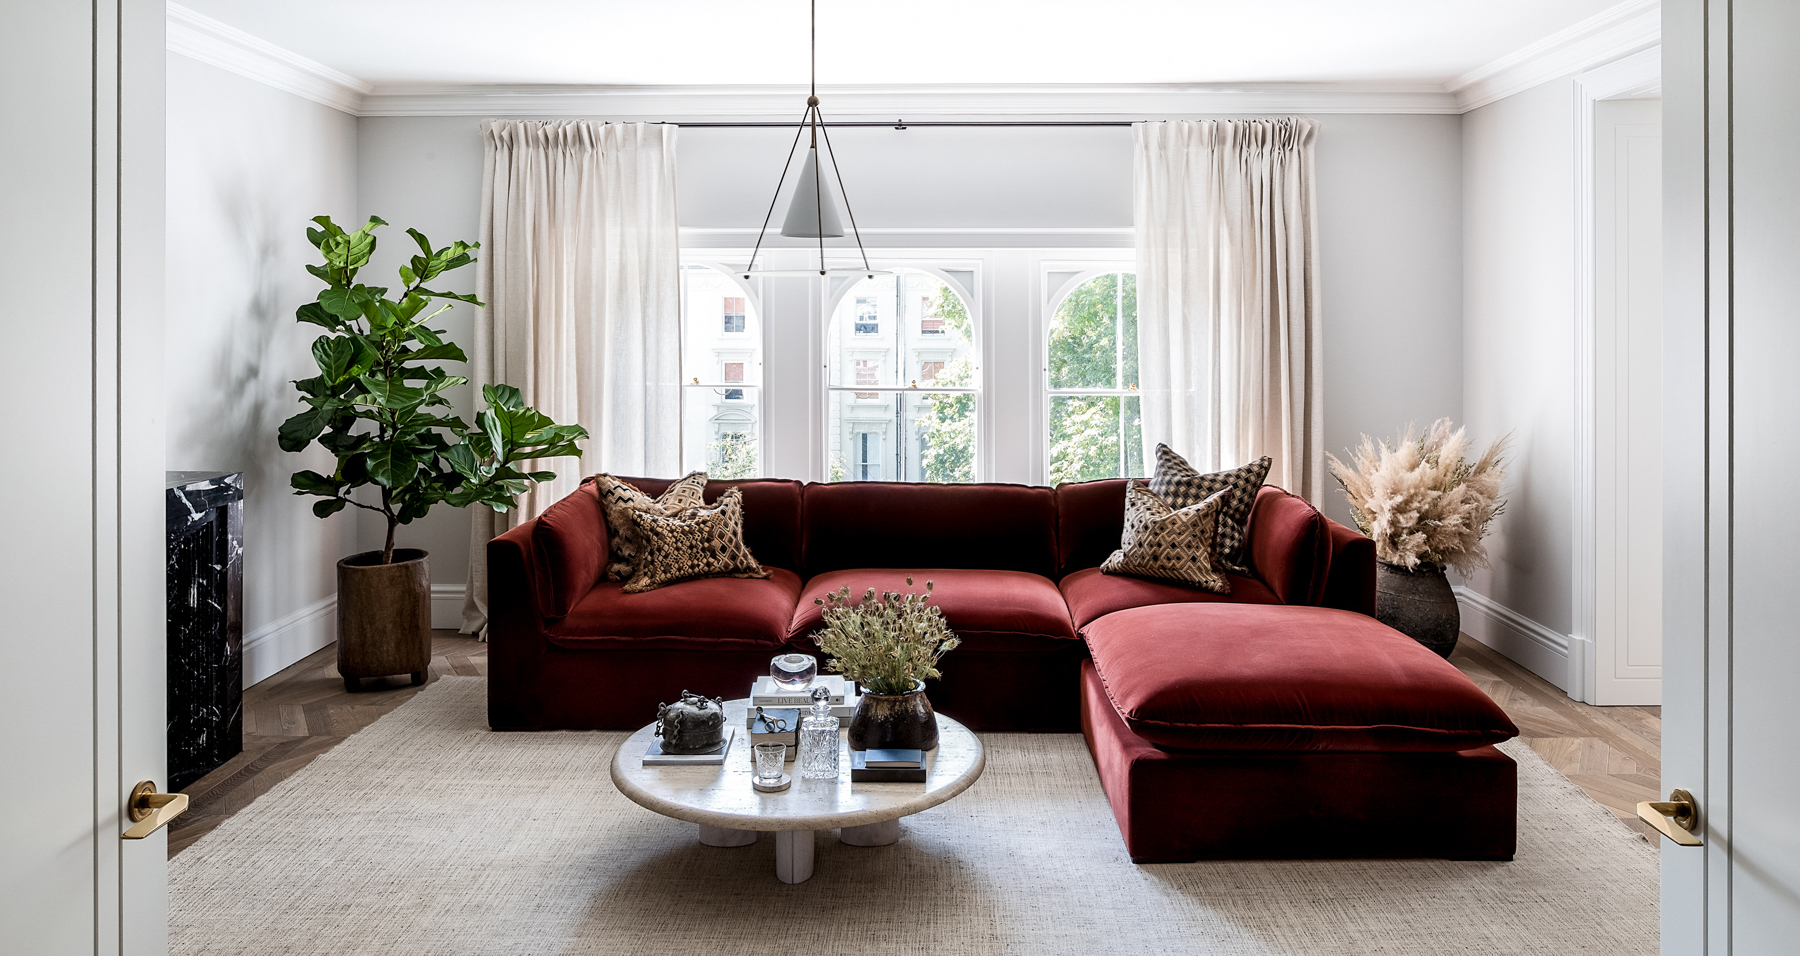 Banda interior design studio West London apartment living room with large deep red sectional sofa